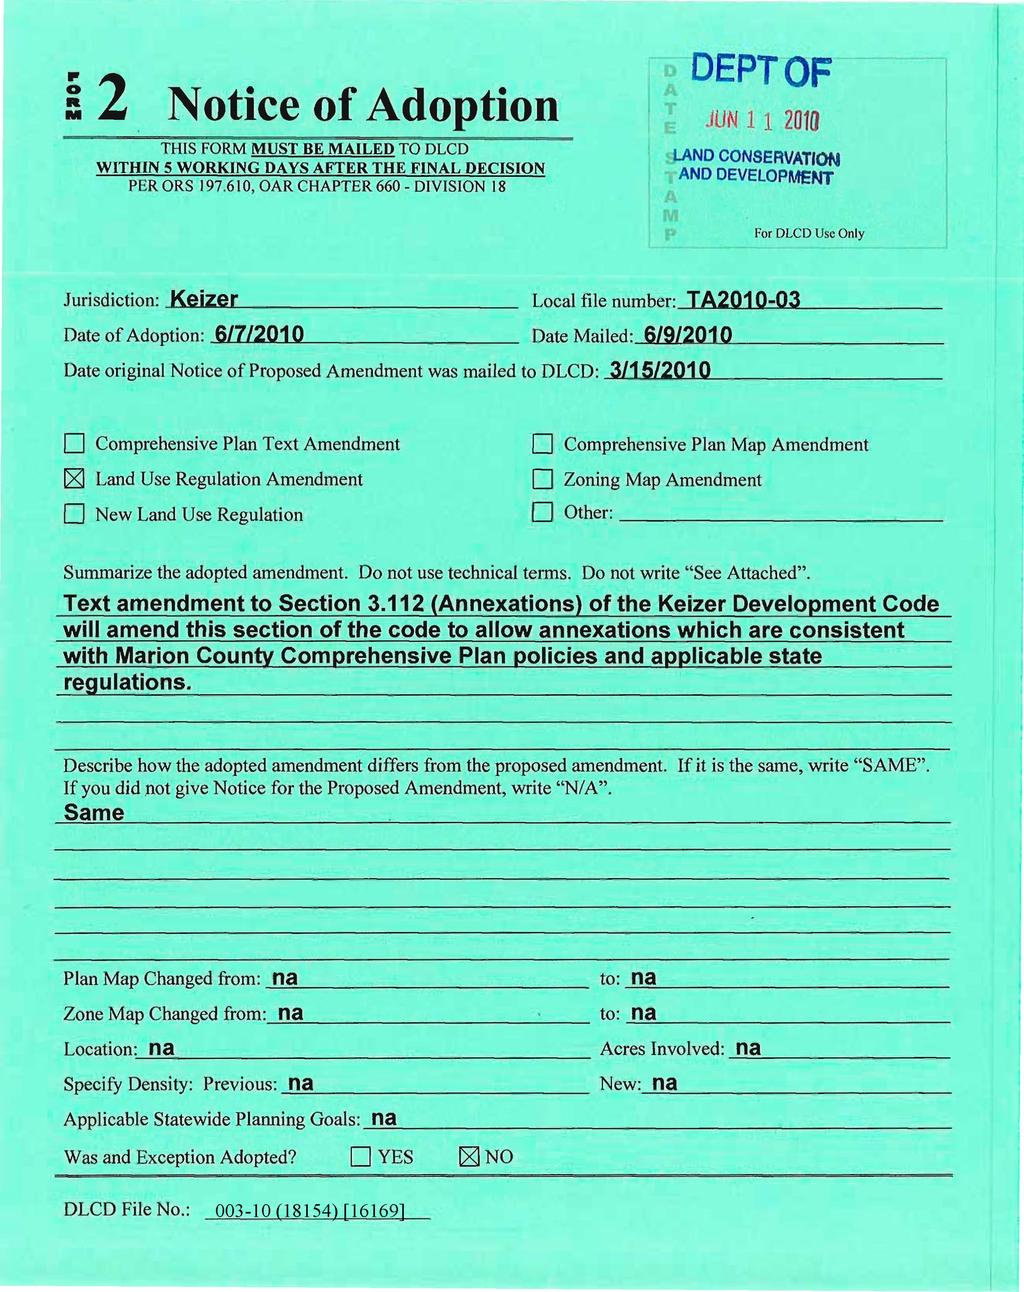 s 2 Notice of Adoption THIS FORM MUST BE MAILED TO DLCD WITHIN 5 WORKING DAYS AFTER THE FINAL DECISION PERORS 197.